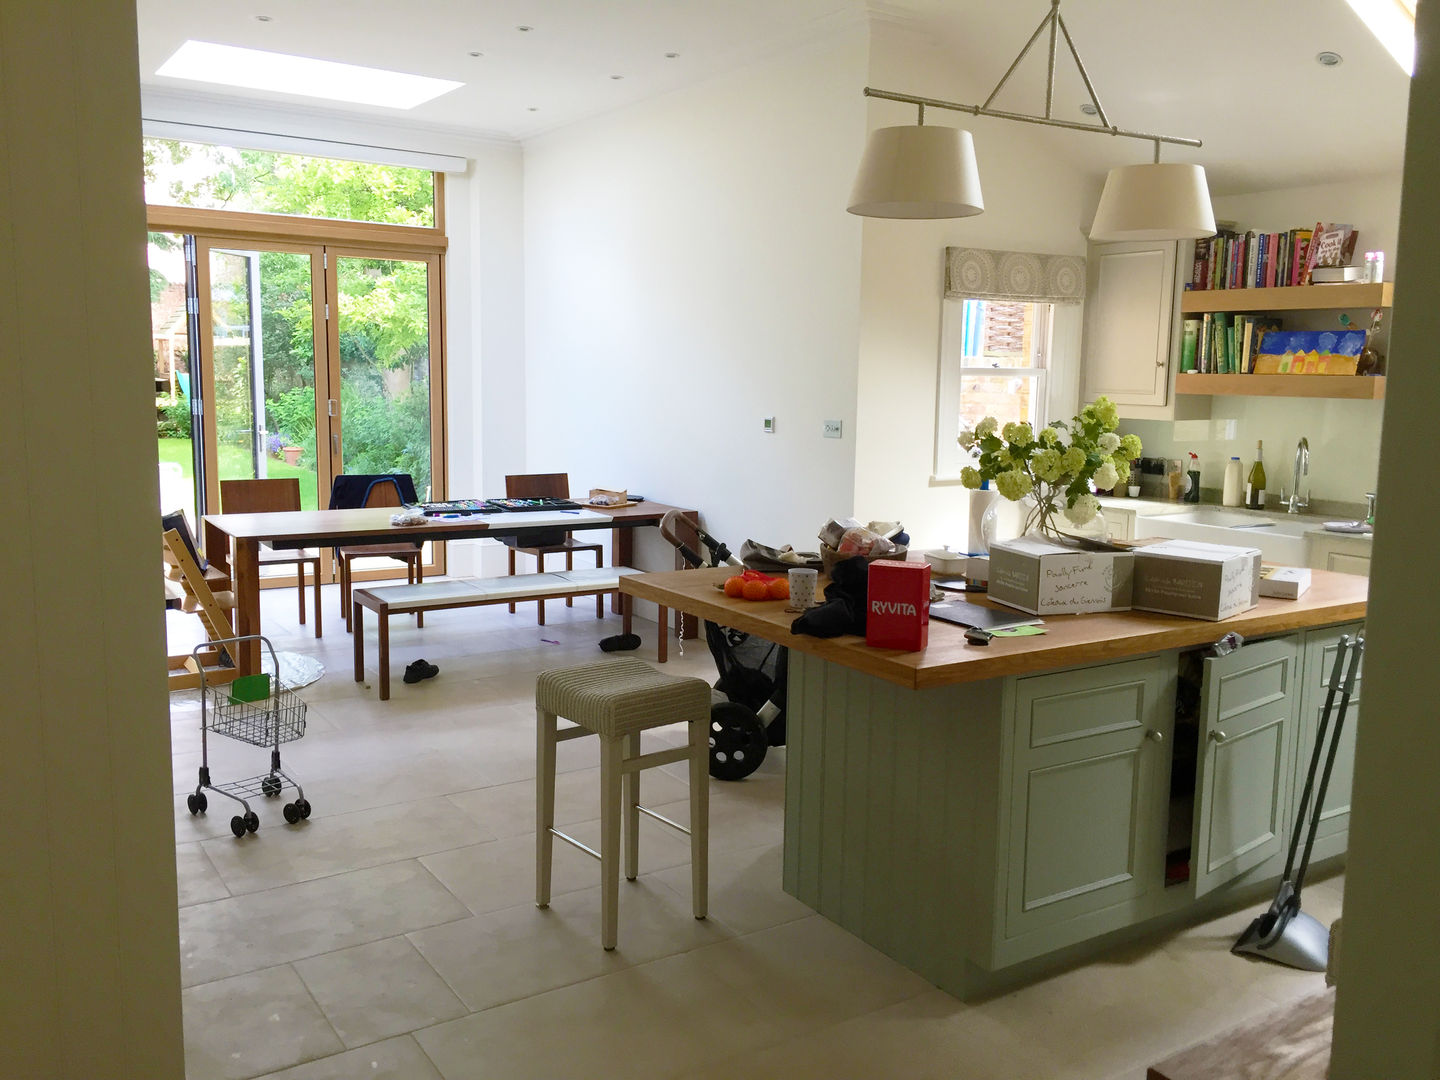 Kitchen - As Built Arc 3 Architects & Chartered Surveyors